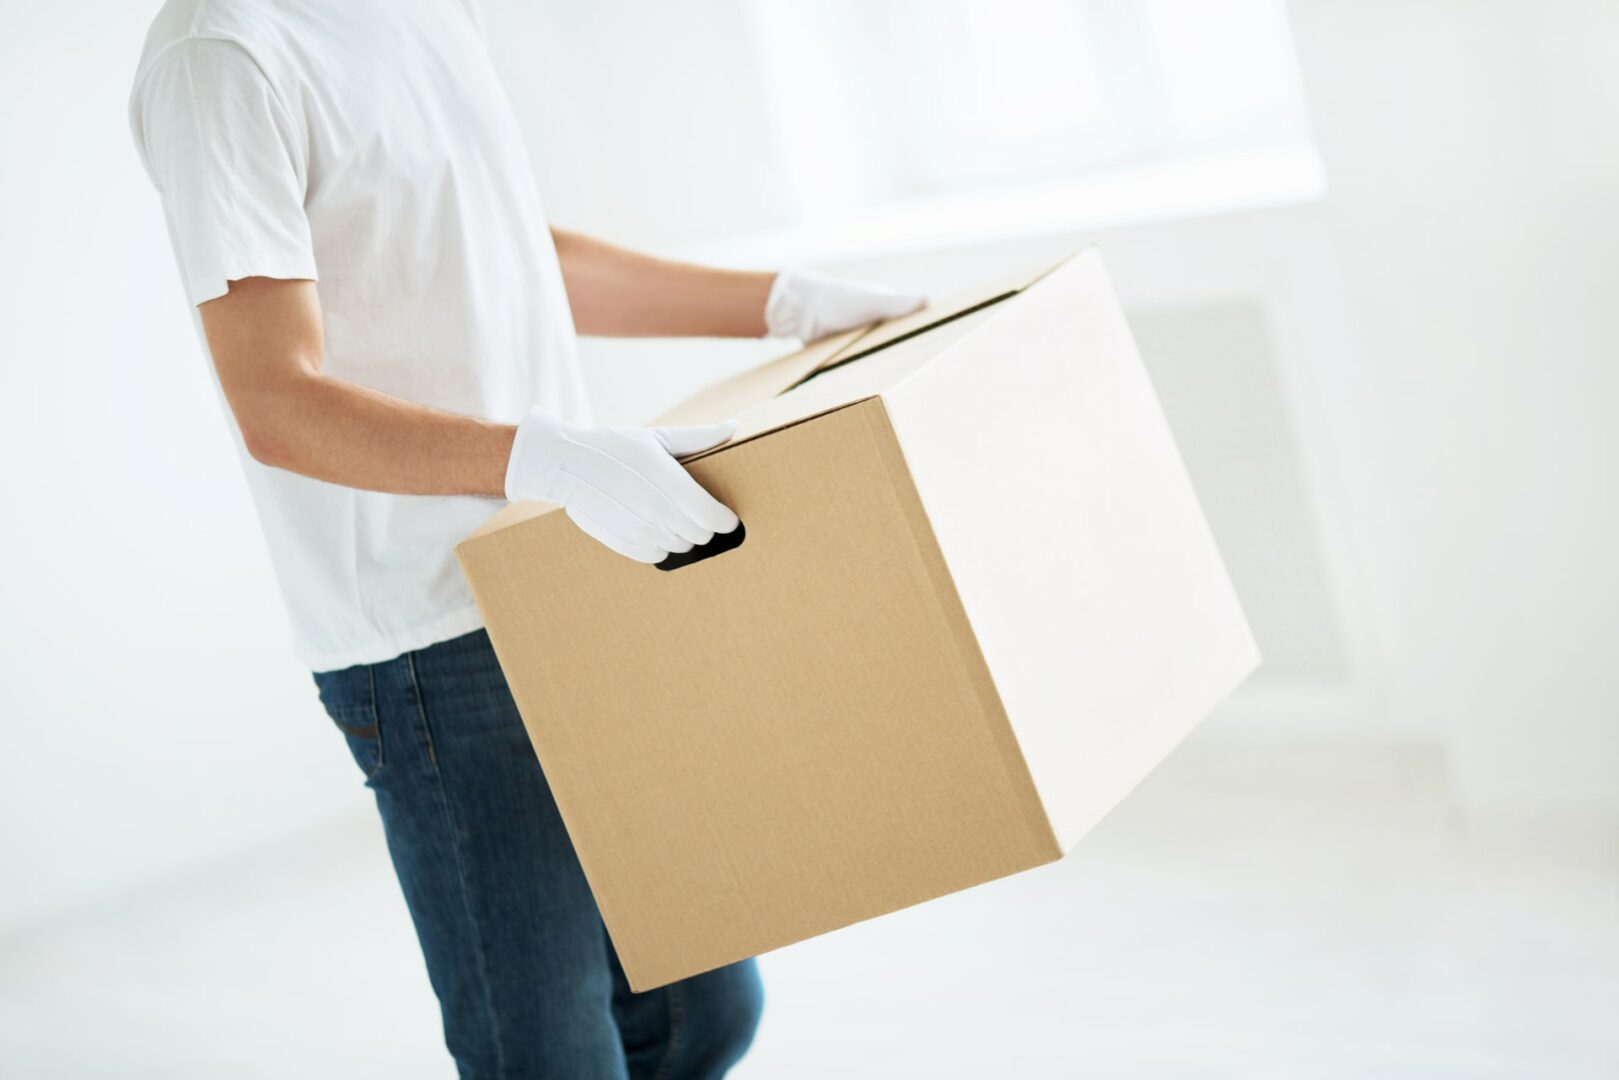 Best White Glove Luxury Moving Company in Dallas-Fort Worth Texas